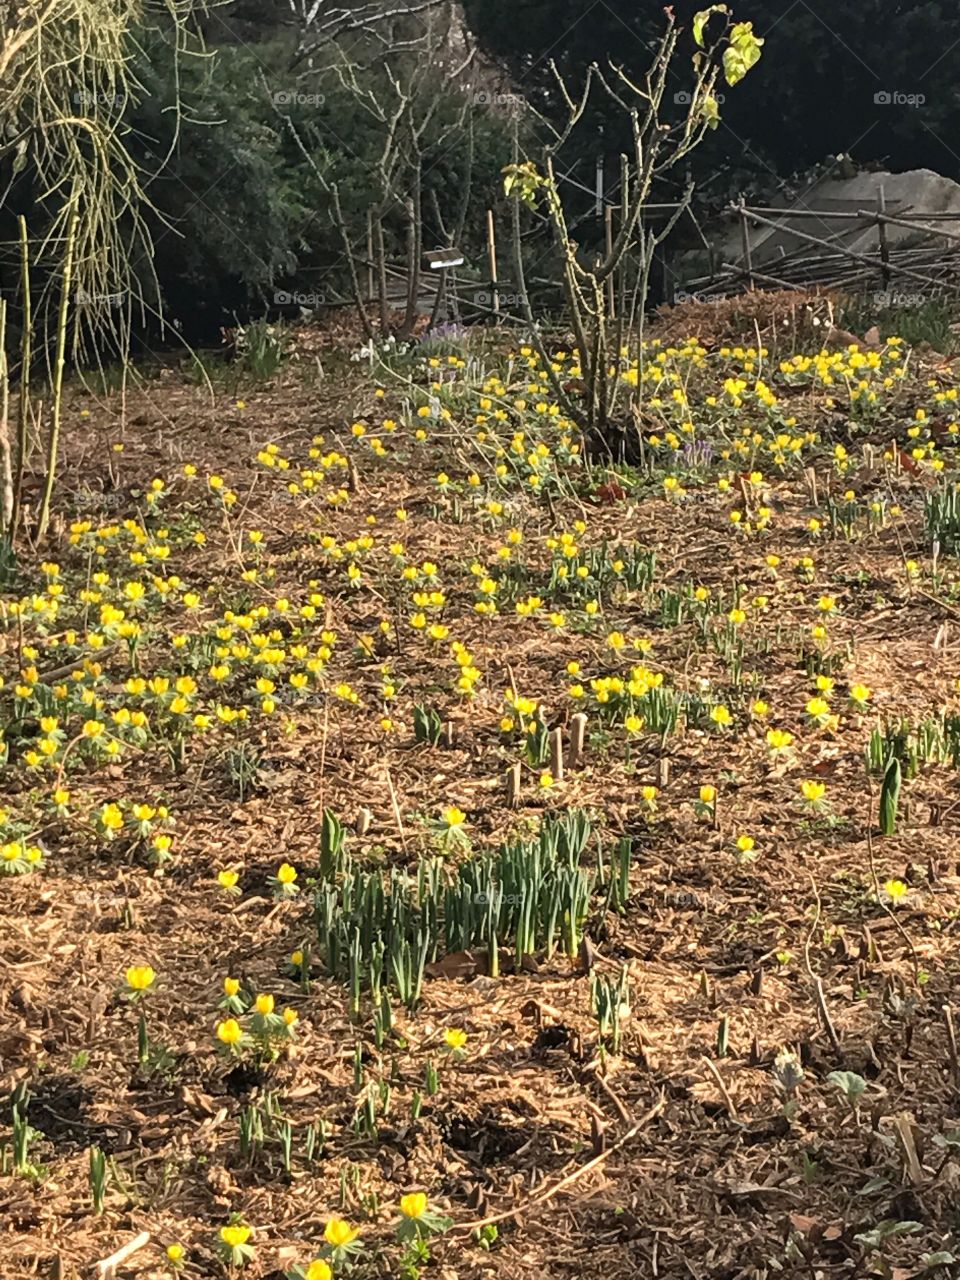 Early spring, flowers in the Central Park, NYC 